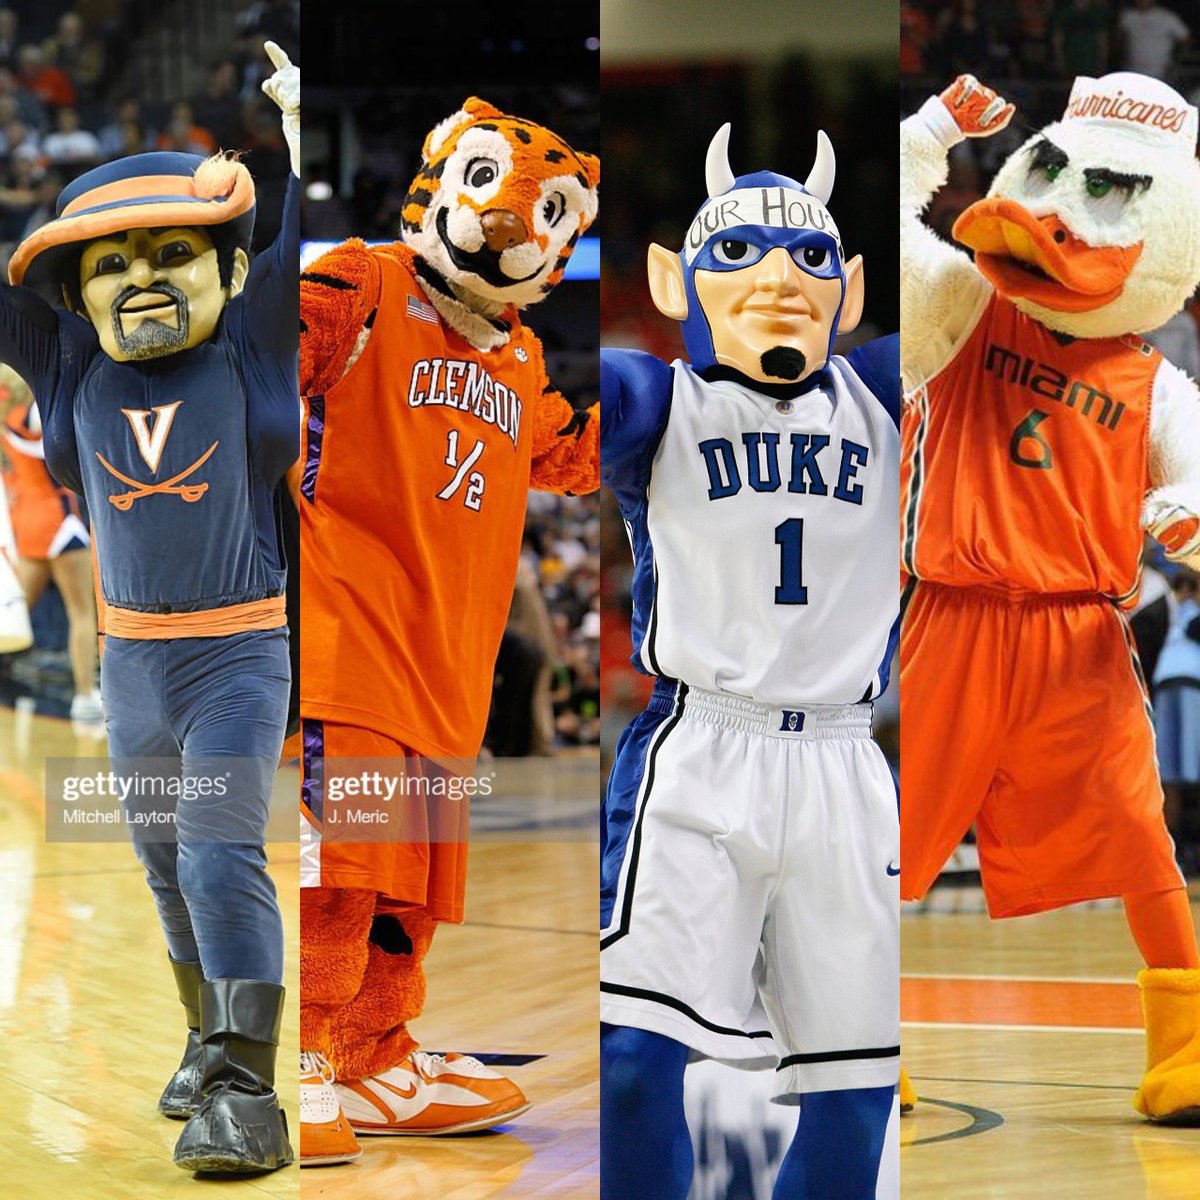 Who are you pulling for??
#virginiacavaliers #clemsontigers #dukebluedevils #miamihurricanes #basketball #sports #ACC23 #MarchMadness